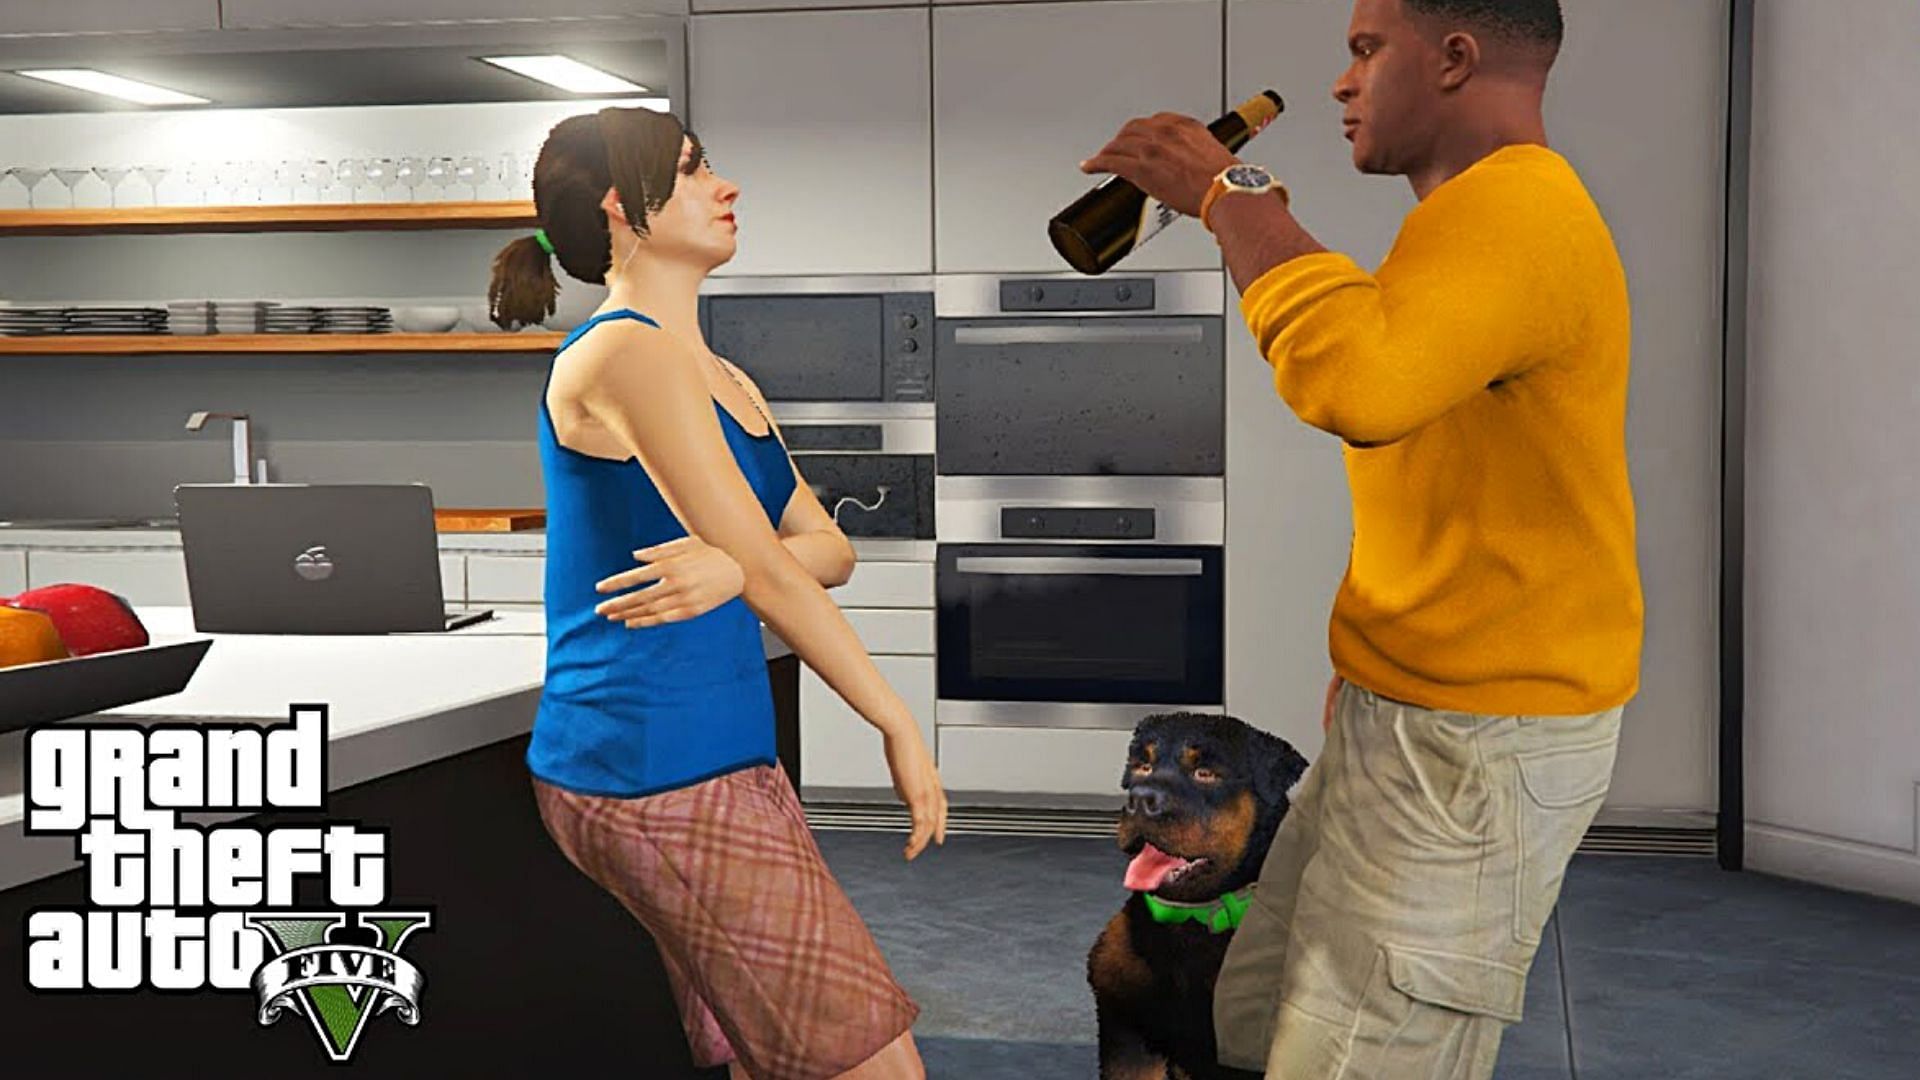 A brief step-by-step guide to get a girlfriend in GTA 5 (Image via Marko Pegan on YouTube)